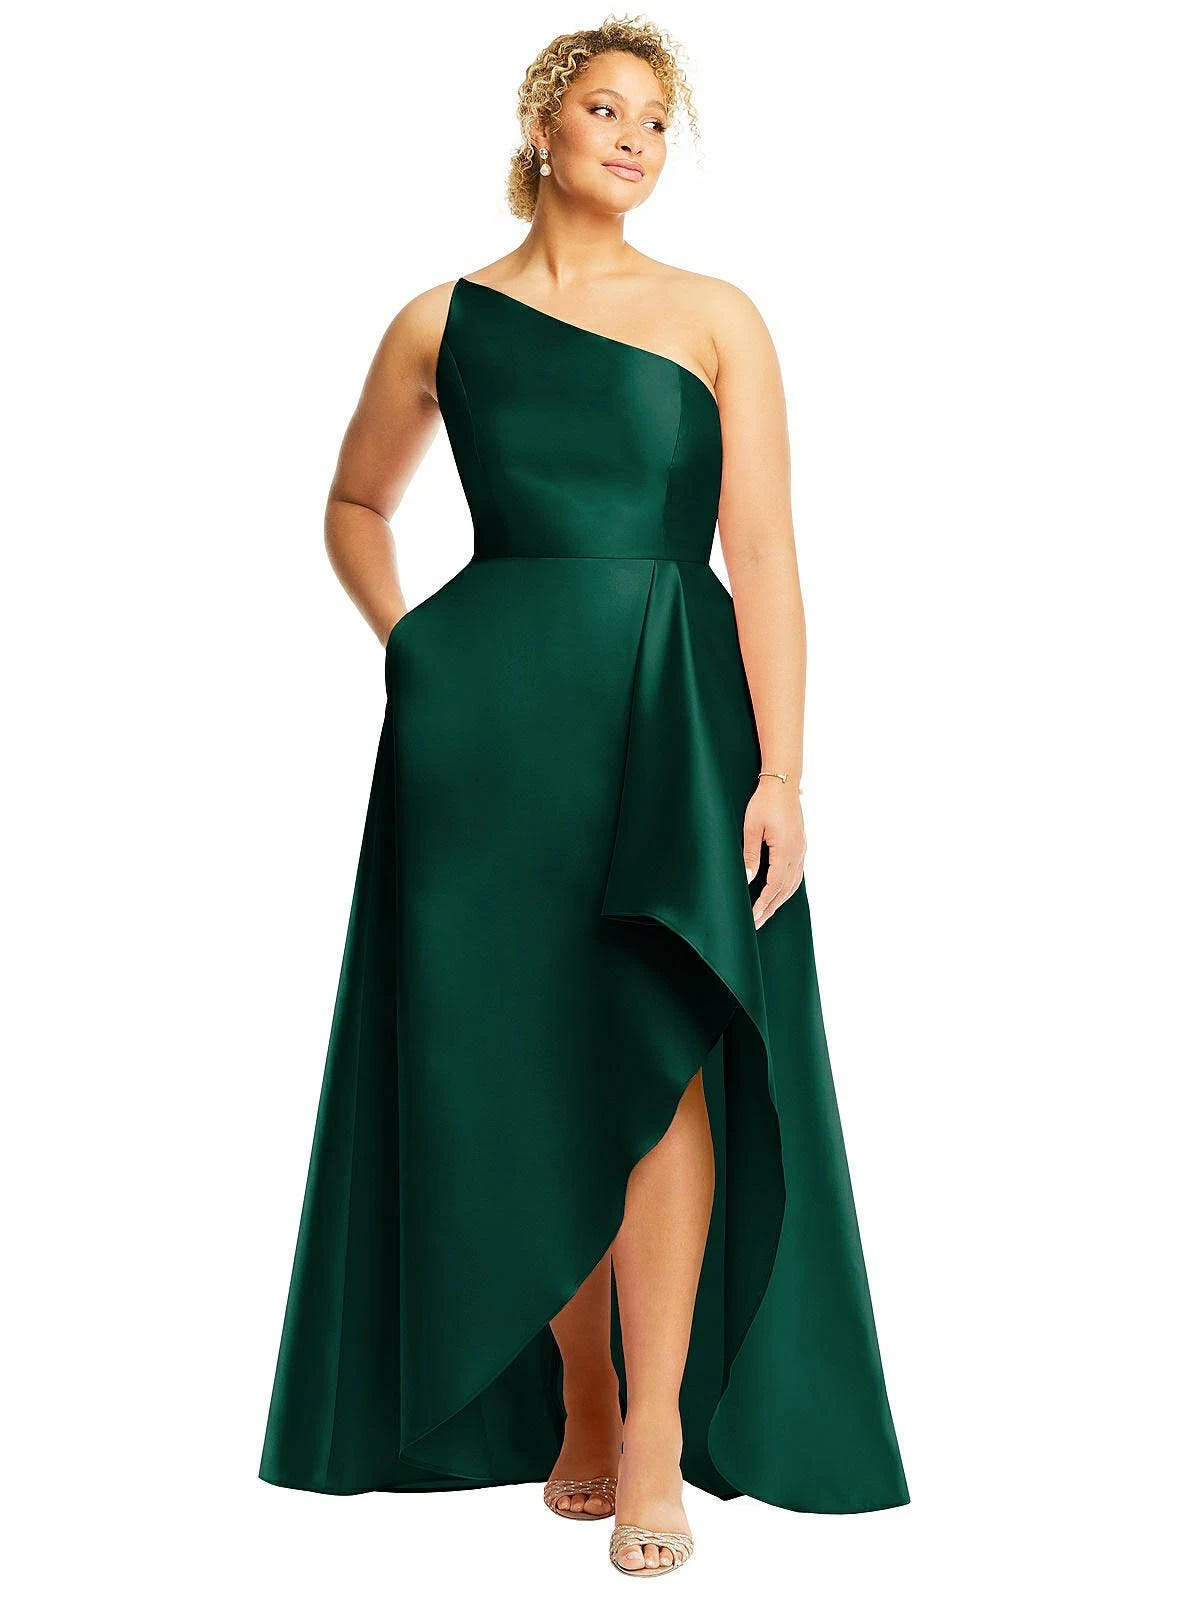 Stylish Hunter Green One-Shoulder Satin Gown | Image